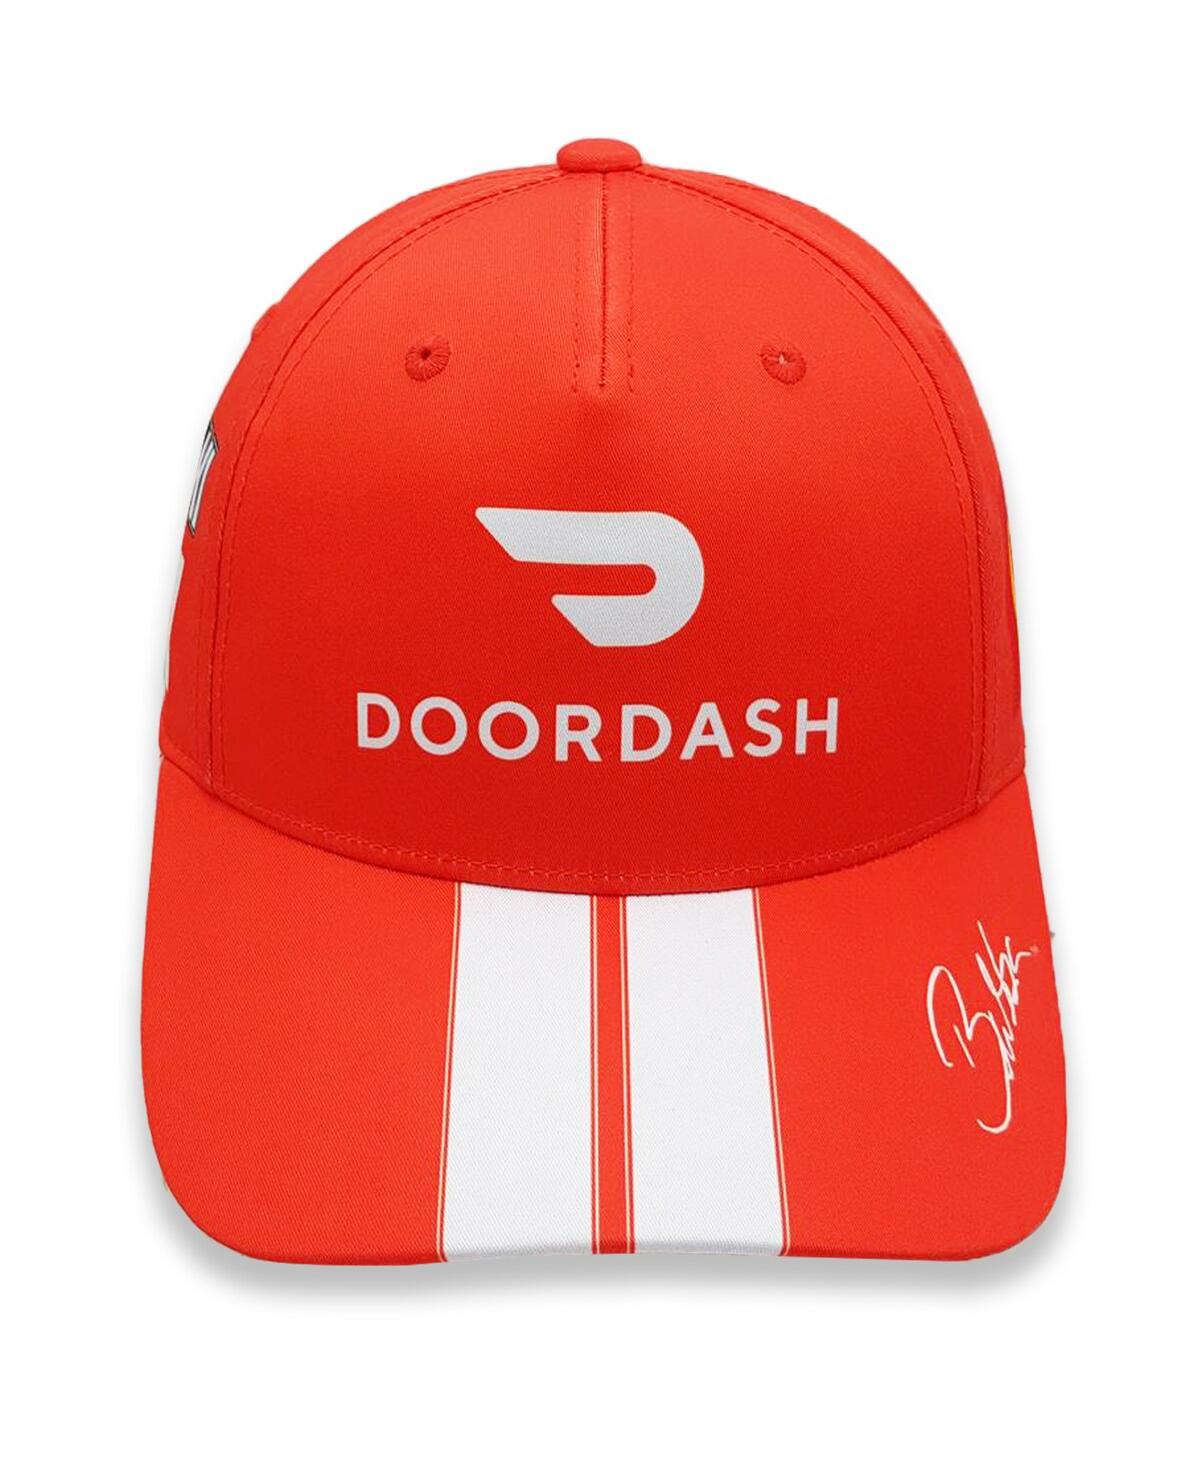 Men's Checkered Flag Red and White Bubba Wallace DoorDash Uniform Adjustable Hat - Red, White